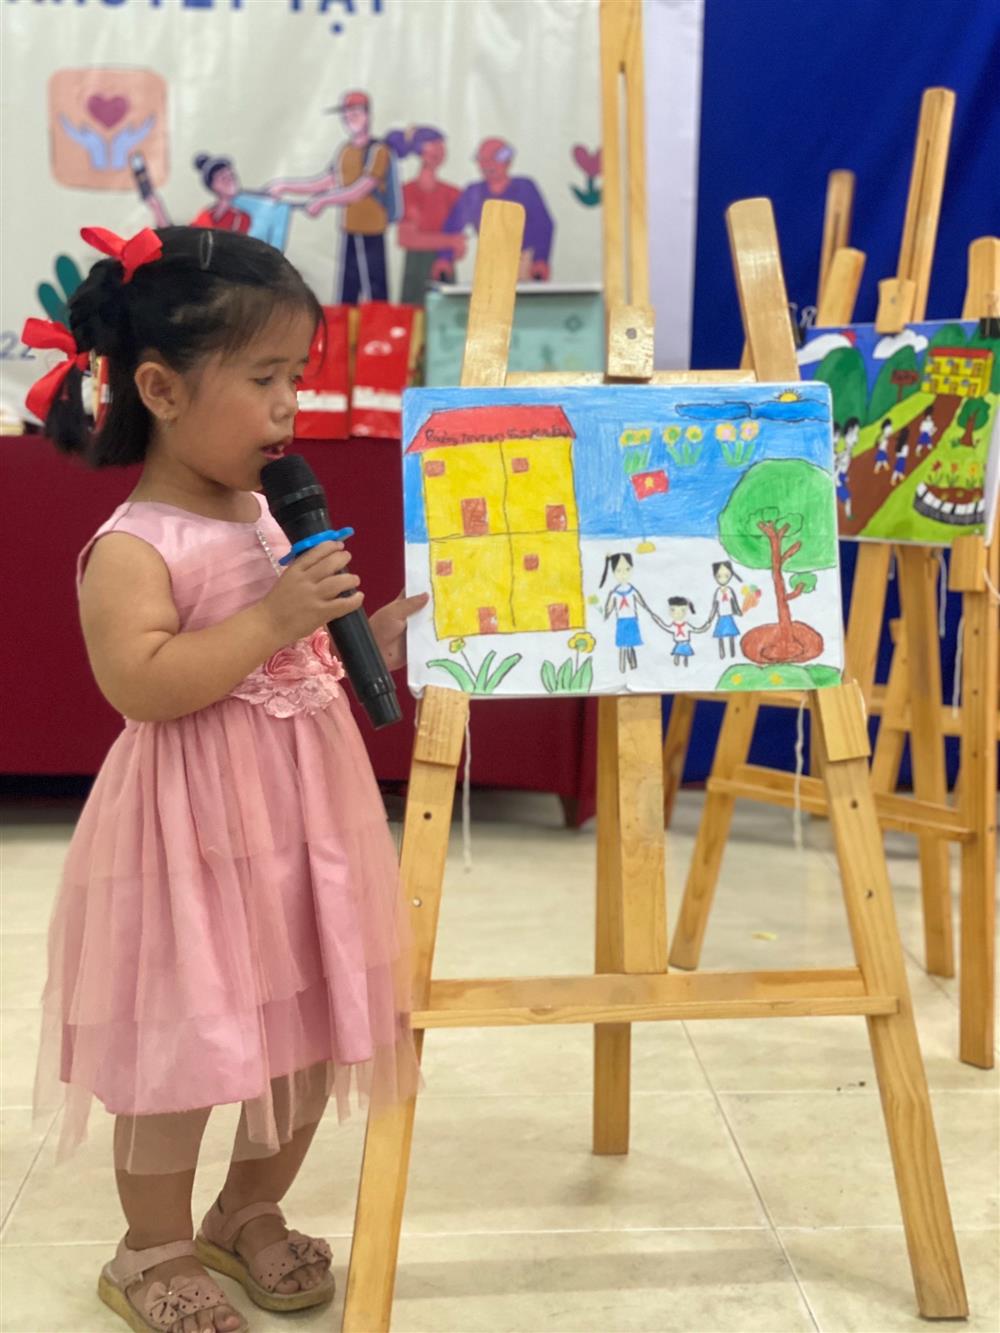 The photo shows a young girl in a pink dress, standing in front of an easel and speaking into a microphone. The easel displays a colorful drawing that appears to be created by a child, featuring a yellow building, greenery, and figures that could represent people. In the background, there are additional easels with artwork, suggesting this may be an art exhibition or school event. The setting promotes creativity and expression, and the girl's participation indicates a supportive environment fostering confidence and public speaking at a young age.